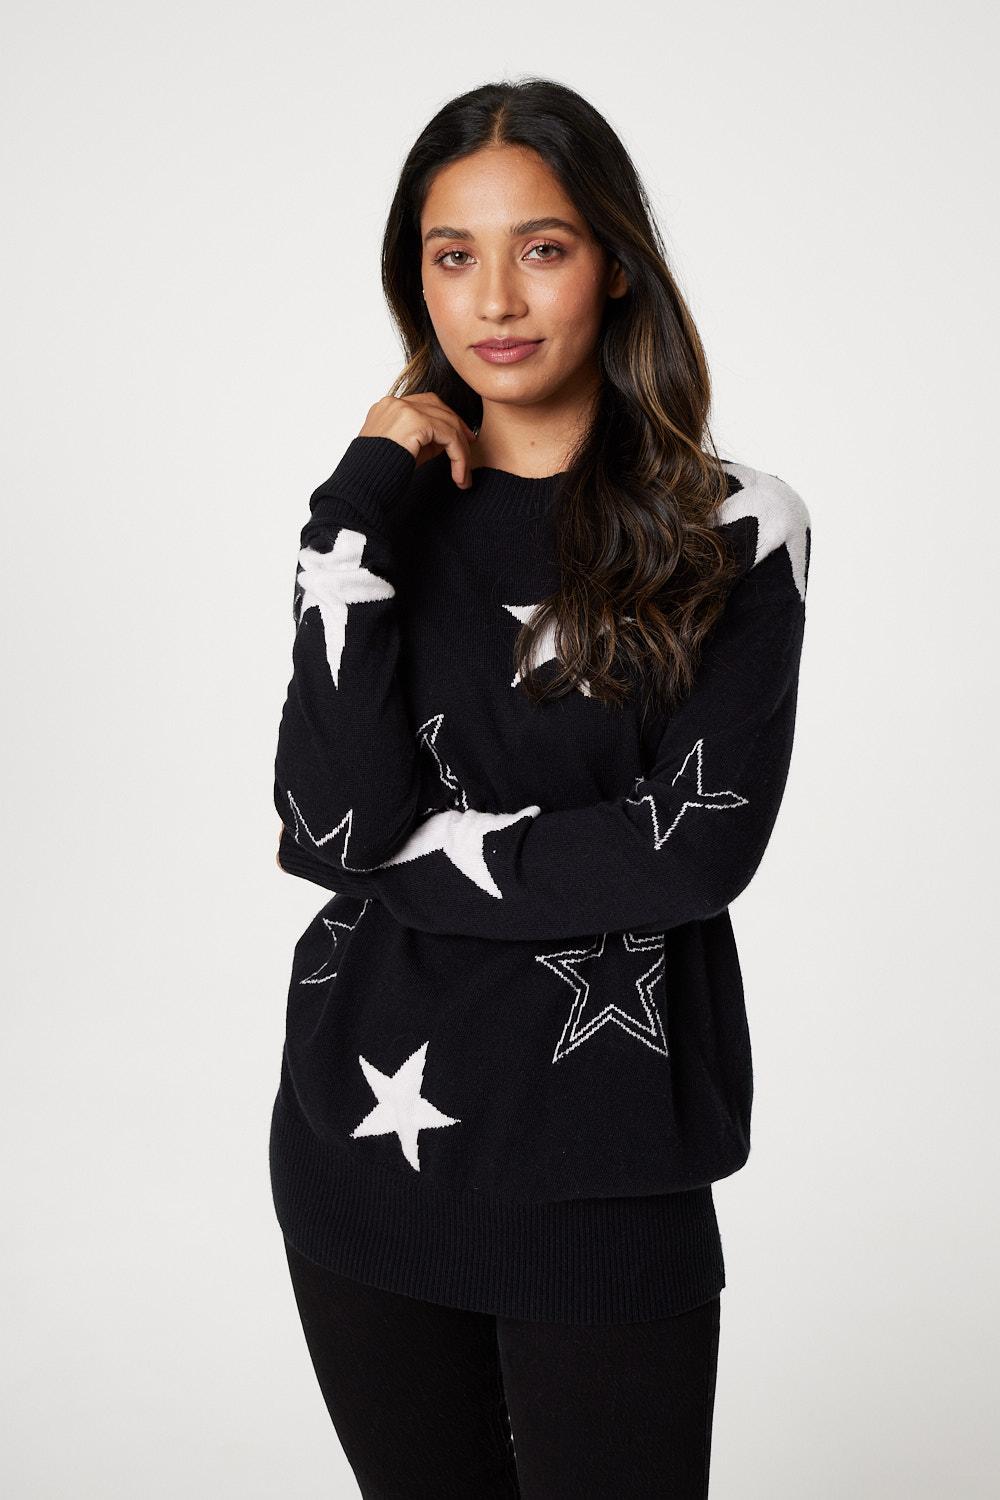 Black | Star Print Relaxed Fit Knit Top : Model is 5'7.5"/171 cm and wears UK8/EU36/US4/AUS8